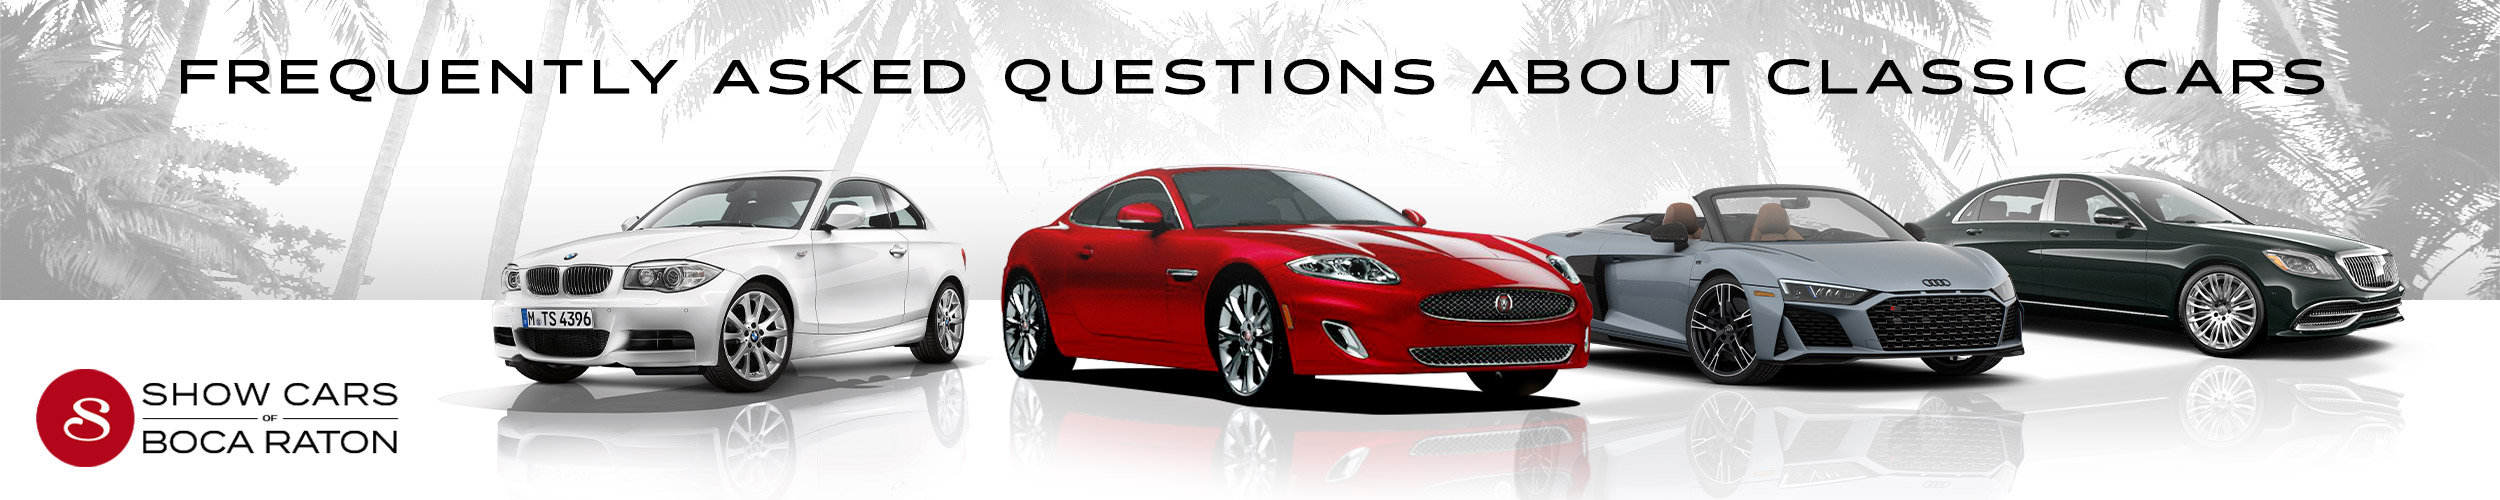 Classic Car Line Up Frequently Asked Questions | Show Cars of Boca Raton | Boca Raton, FL